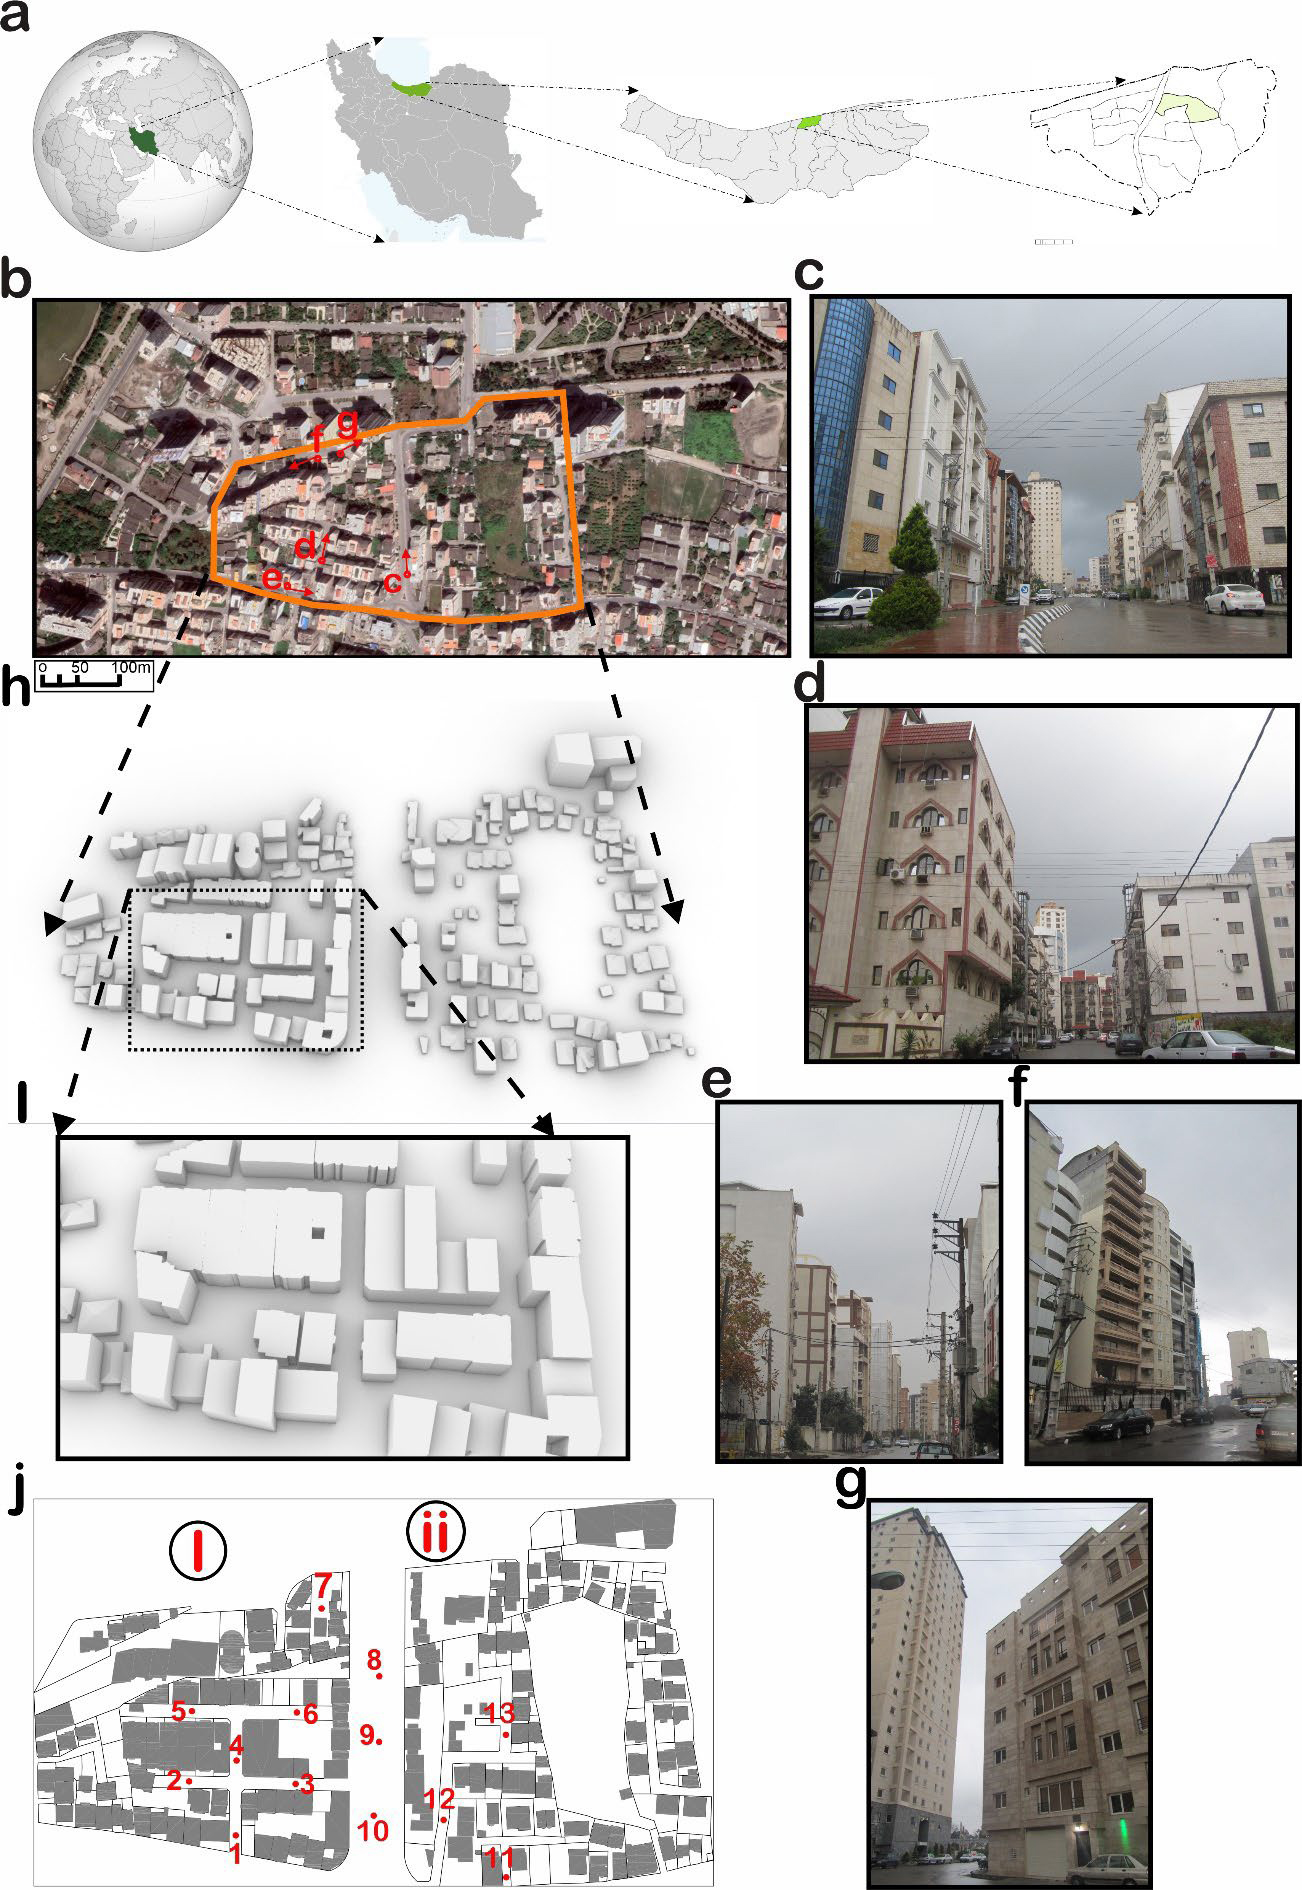 (a) The location of the study area, (b) Aerial view of the case study area and surroundings from West to East. The orange line in (b) indicates the border of the case study area, (h) and (i) Corresponding views of the computational 3D model, (c) Street view from South to North direction (d) Street view from the middle of the study area taken from point 1 on (j) from South to North direction. (e), (f) and (g) Street view from West to East taken from a high rise building south of the case study area, (j) Plan view of the area and location of measurement points.